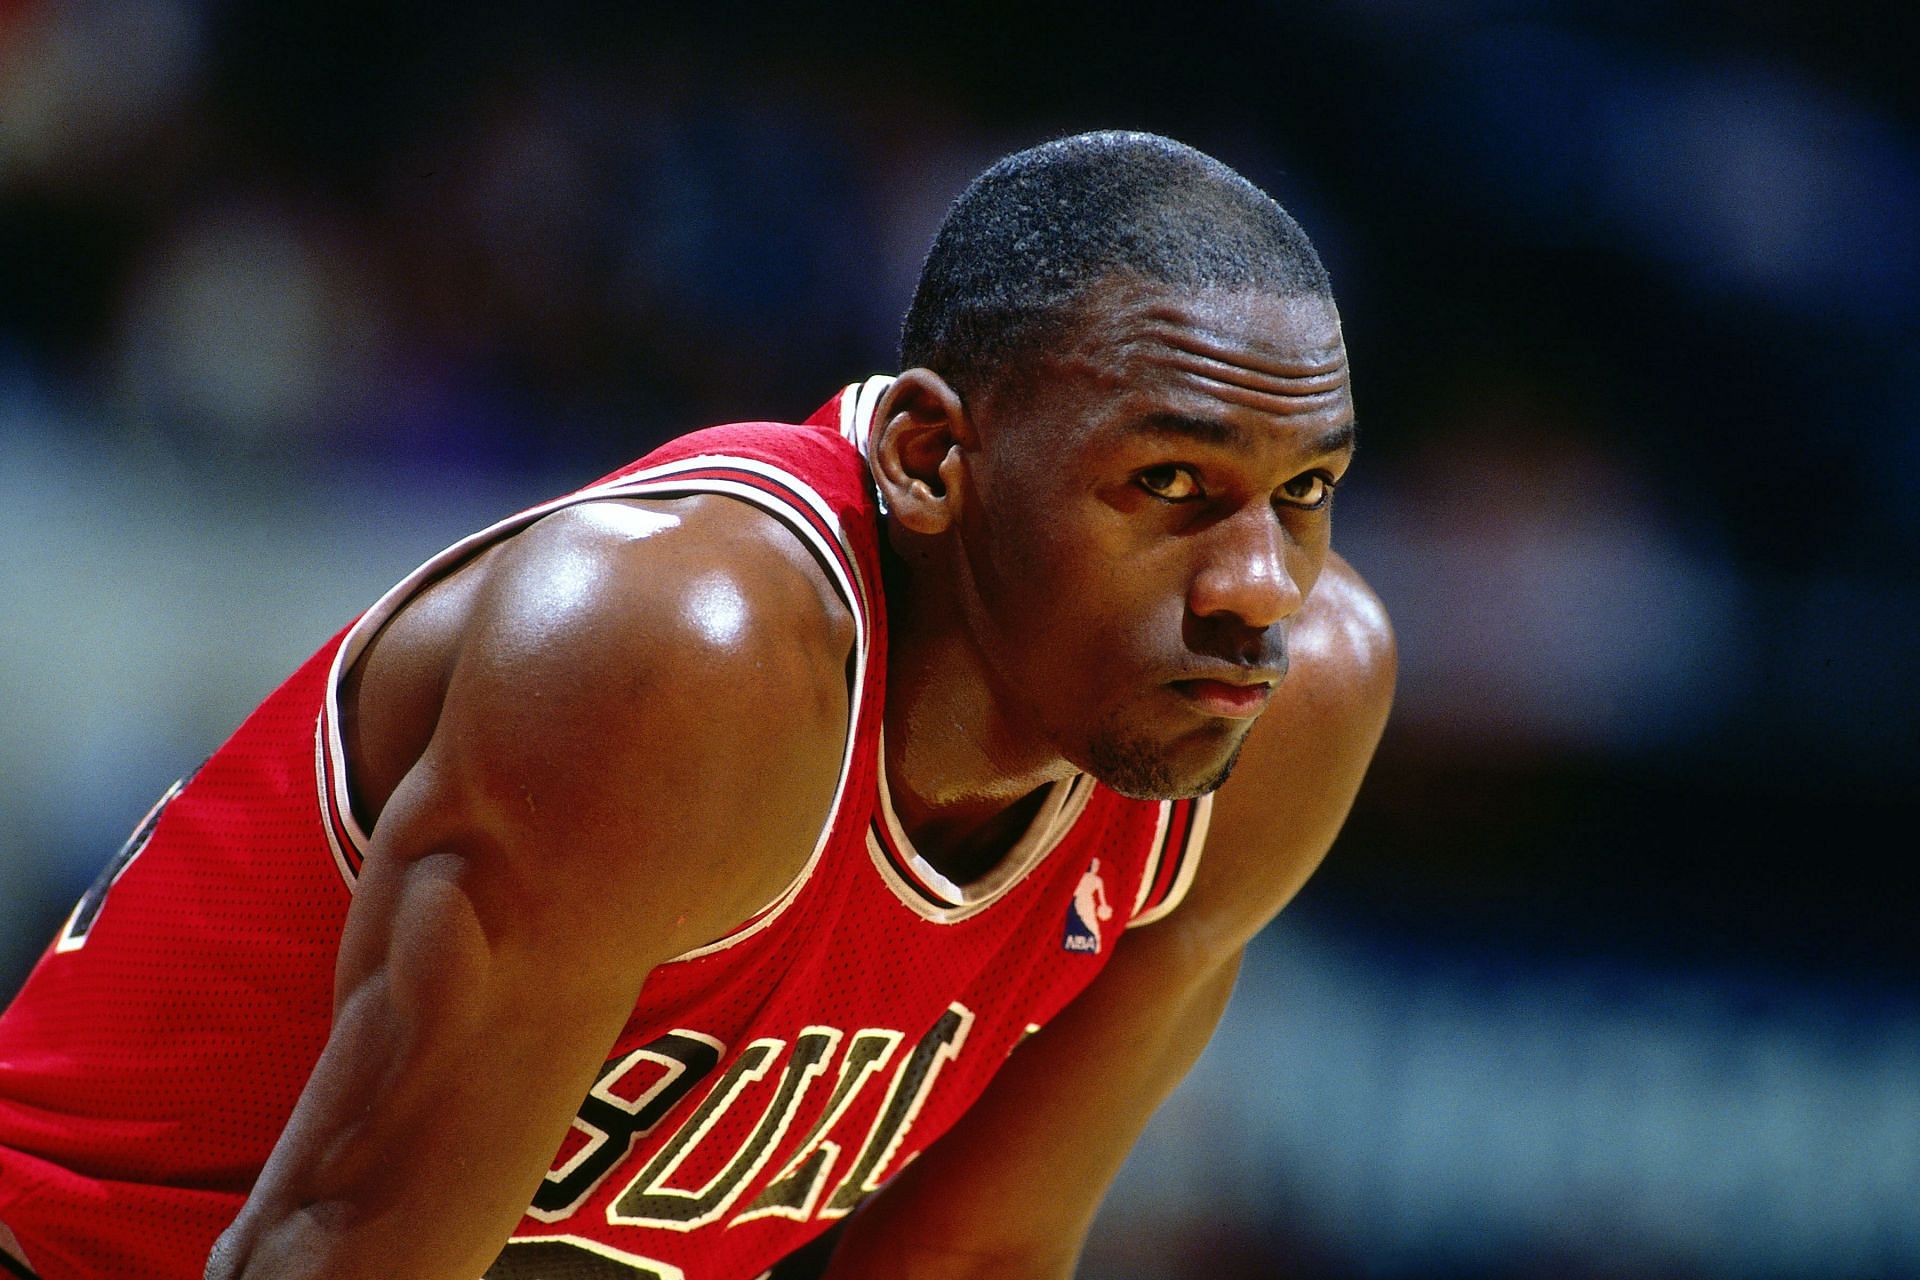 Michael Jordan was one of the best to play the game of basketball.